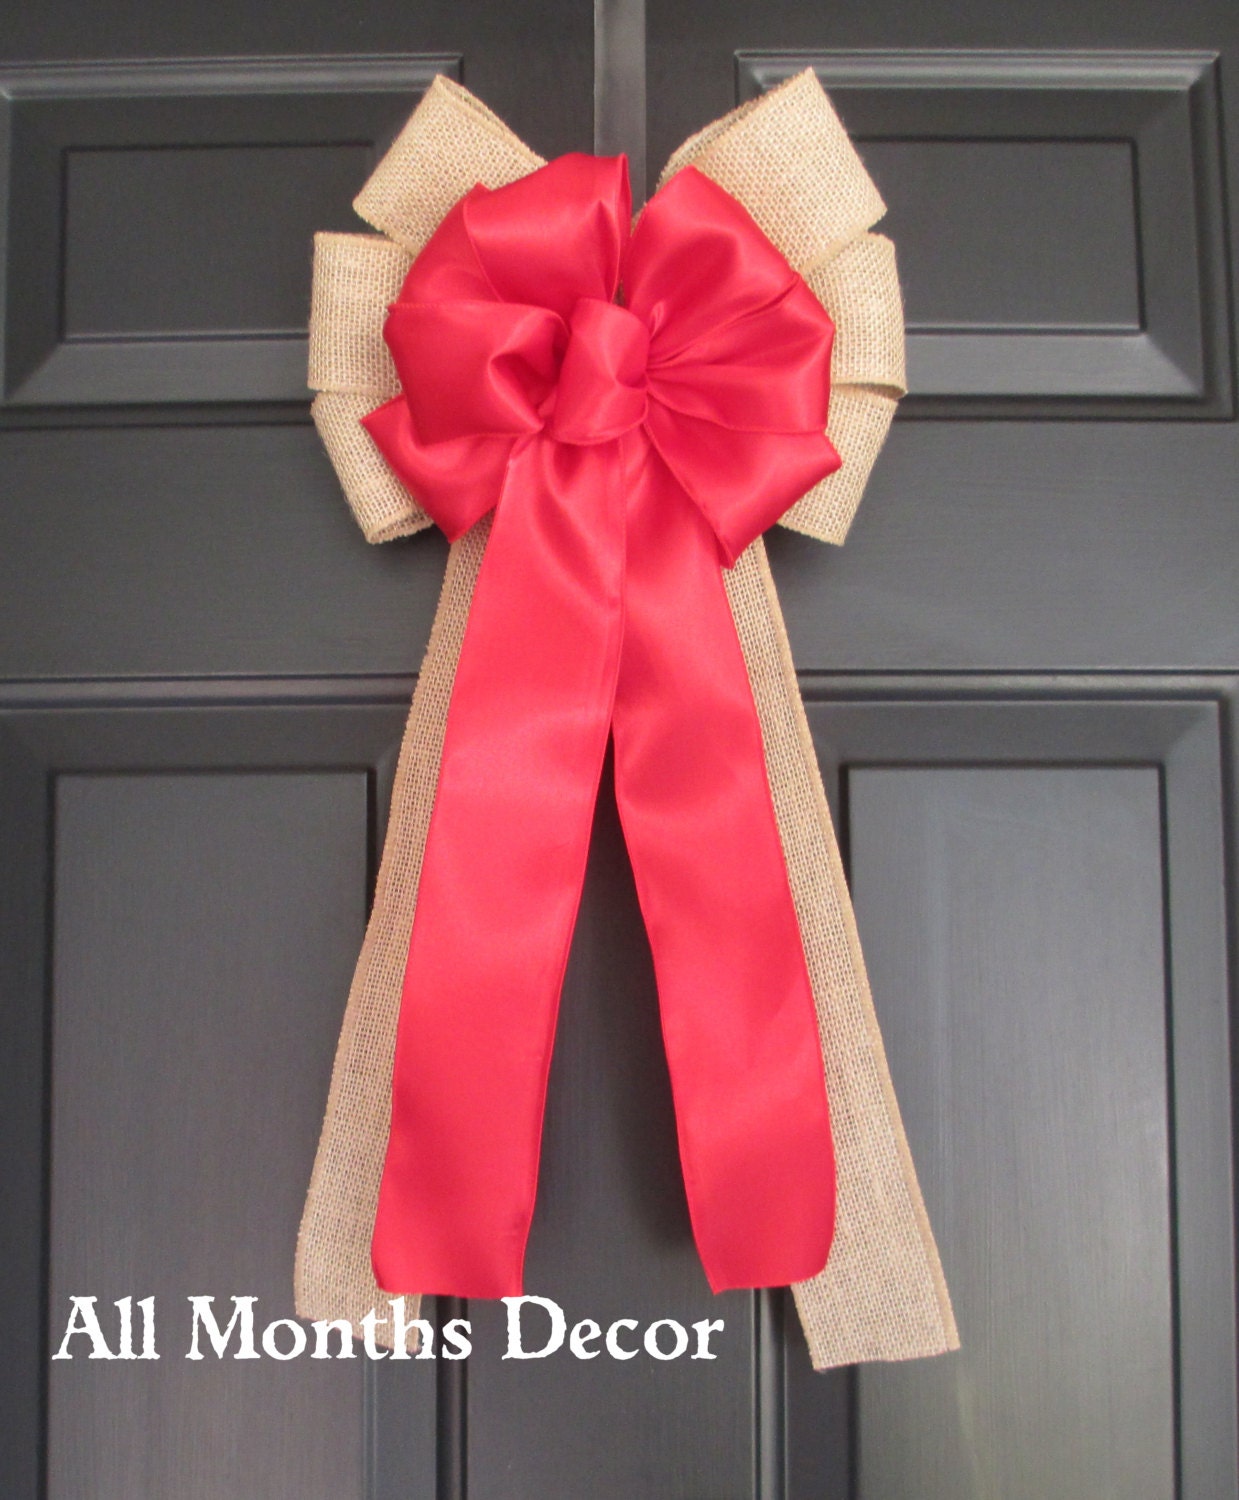 Red Satin over Natural Burlap Bow, Bridal Wedding Decor, Country Rustic Shabby Chic, Home Pew Aisle, Party, New Mom Baby Shower